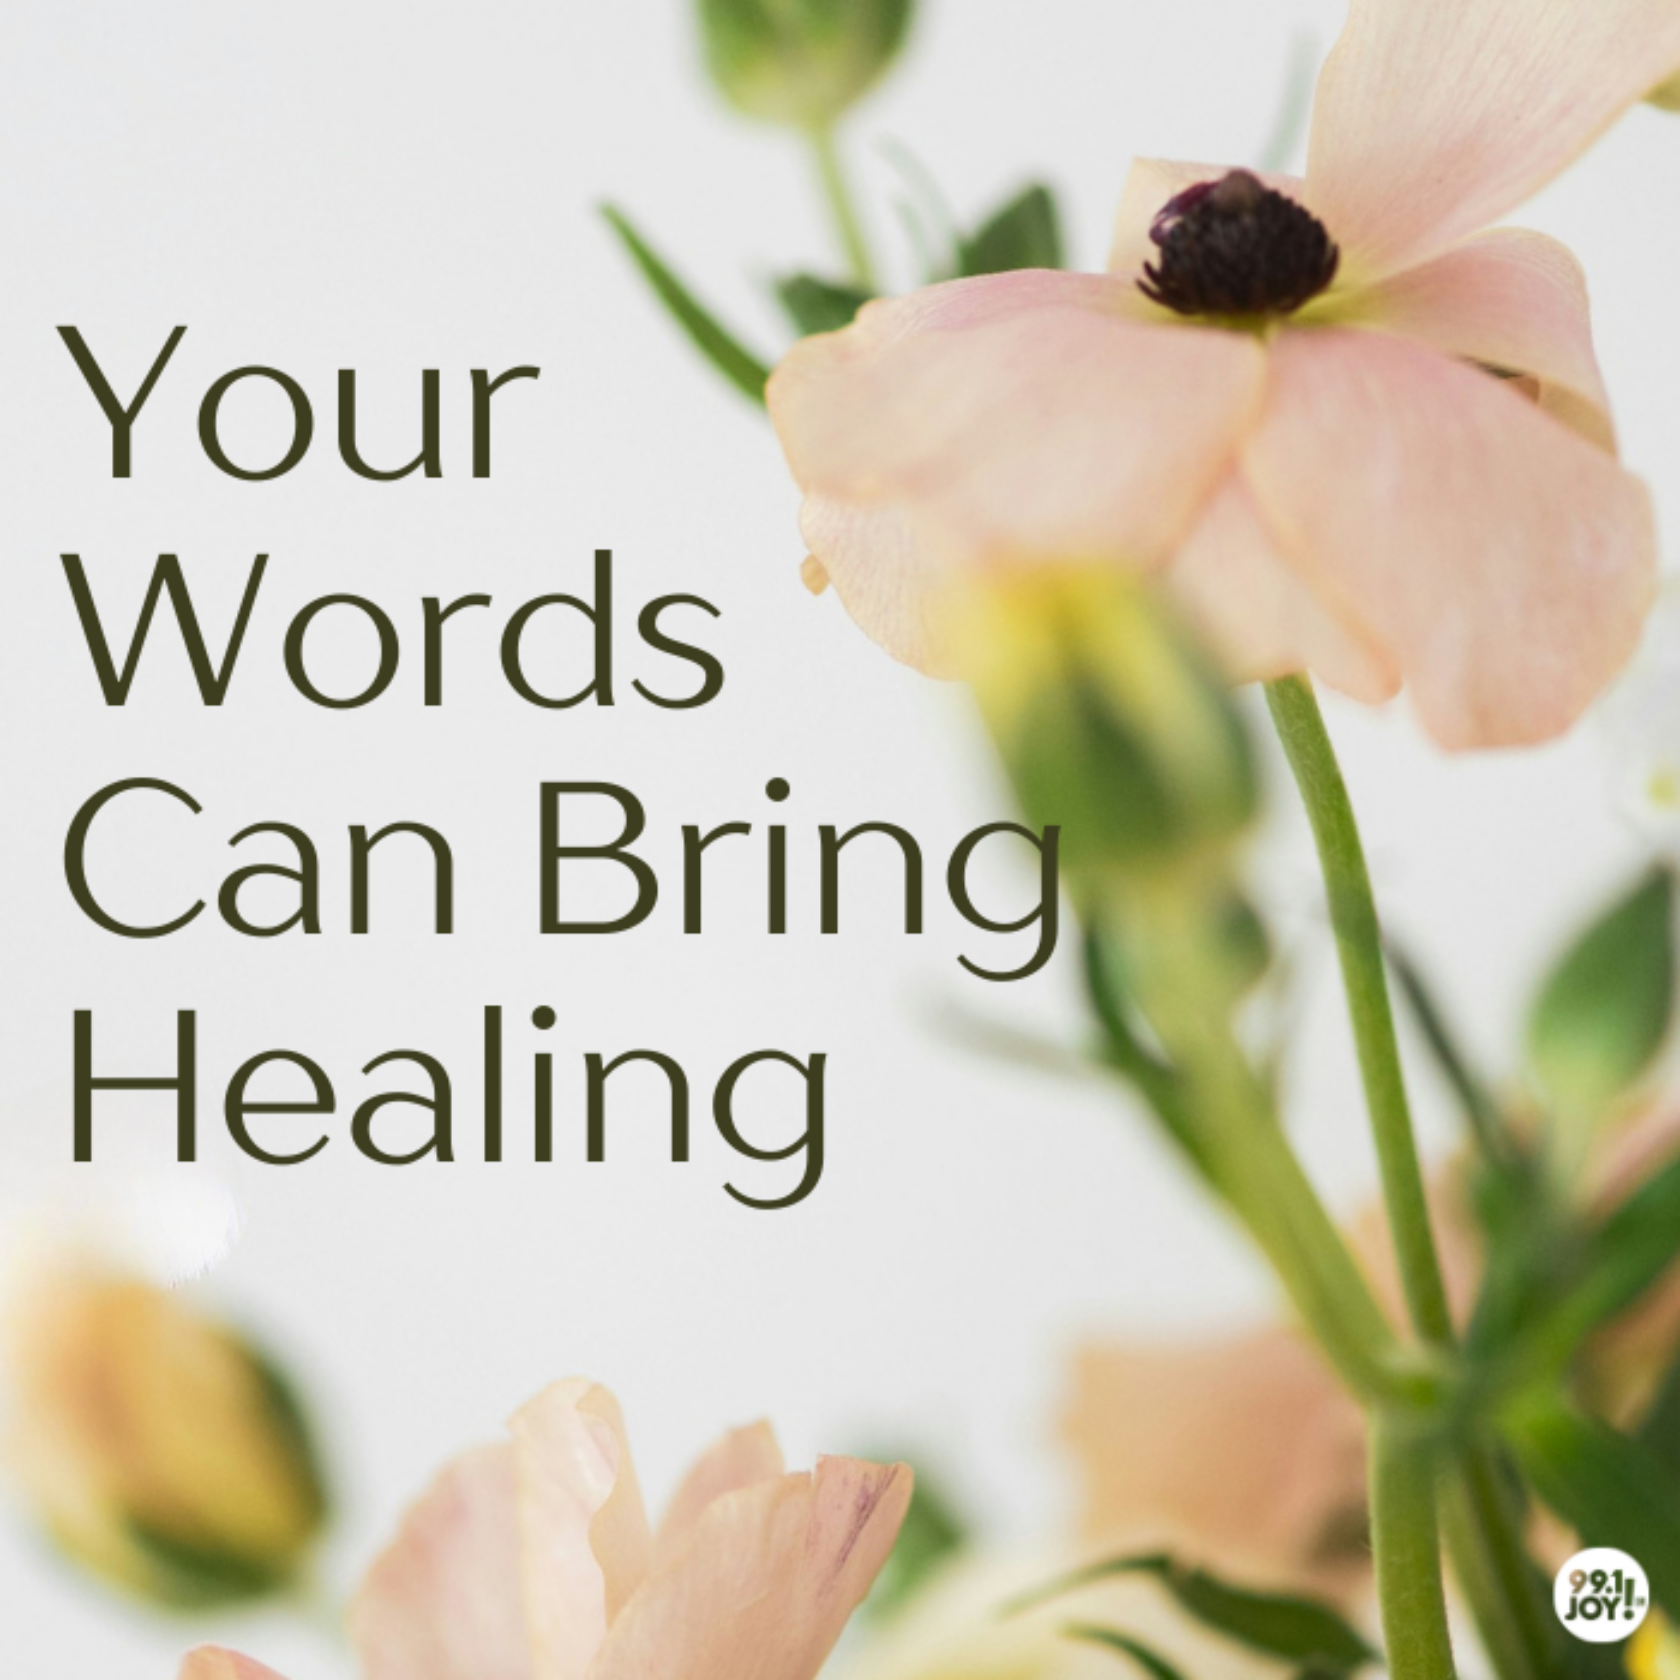 Your Words Can Bring Healing